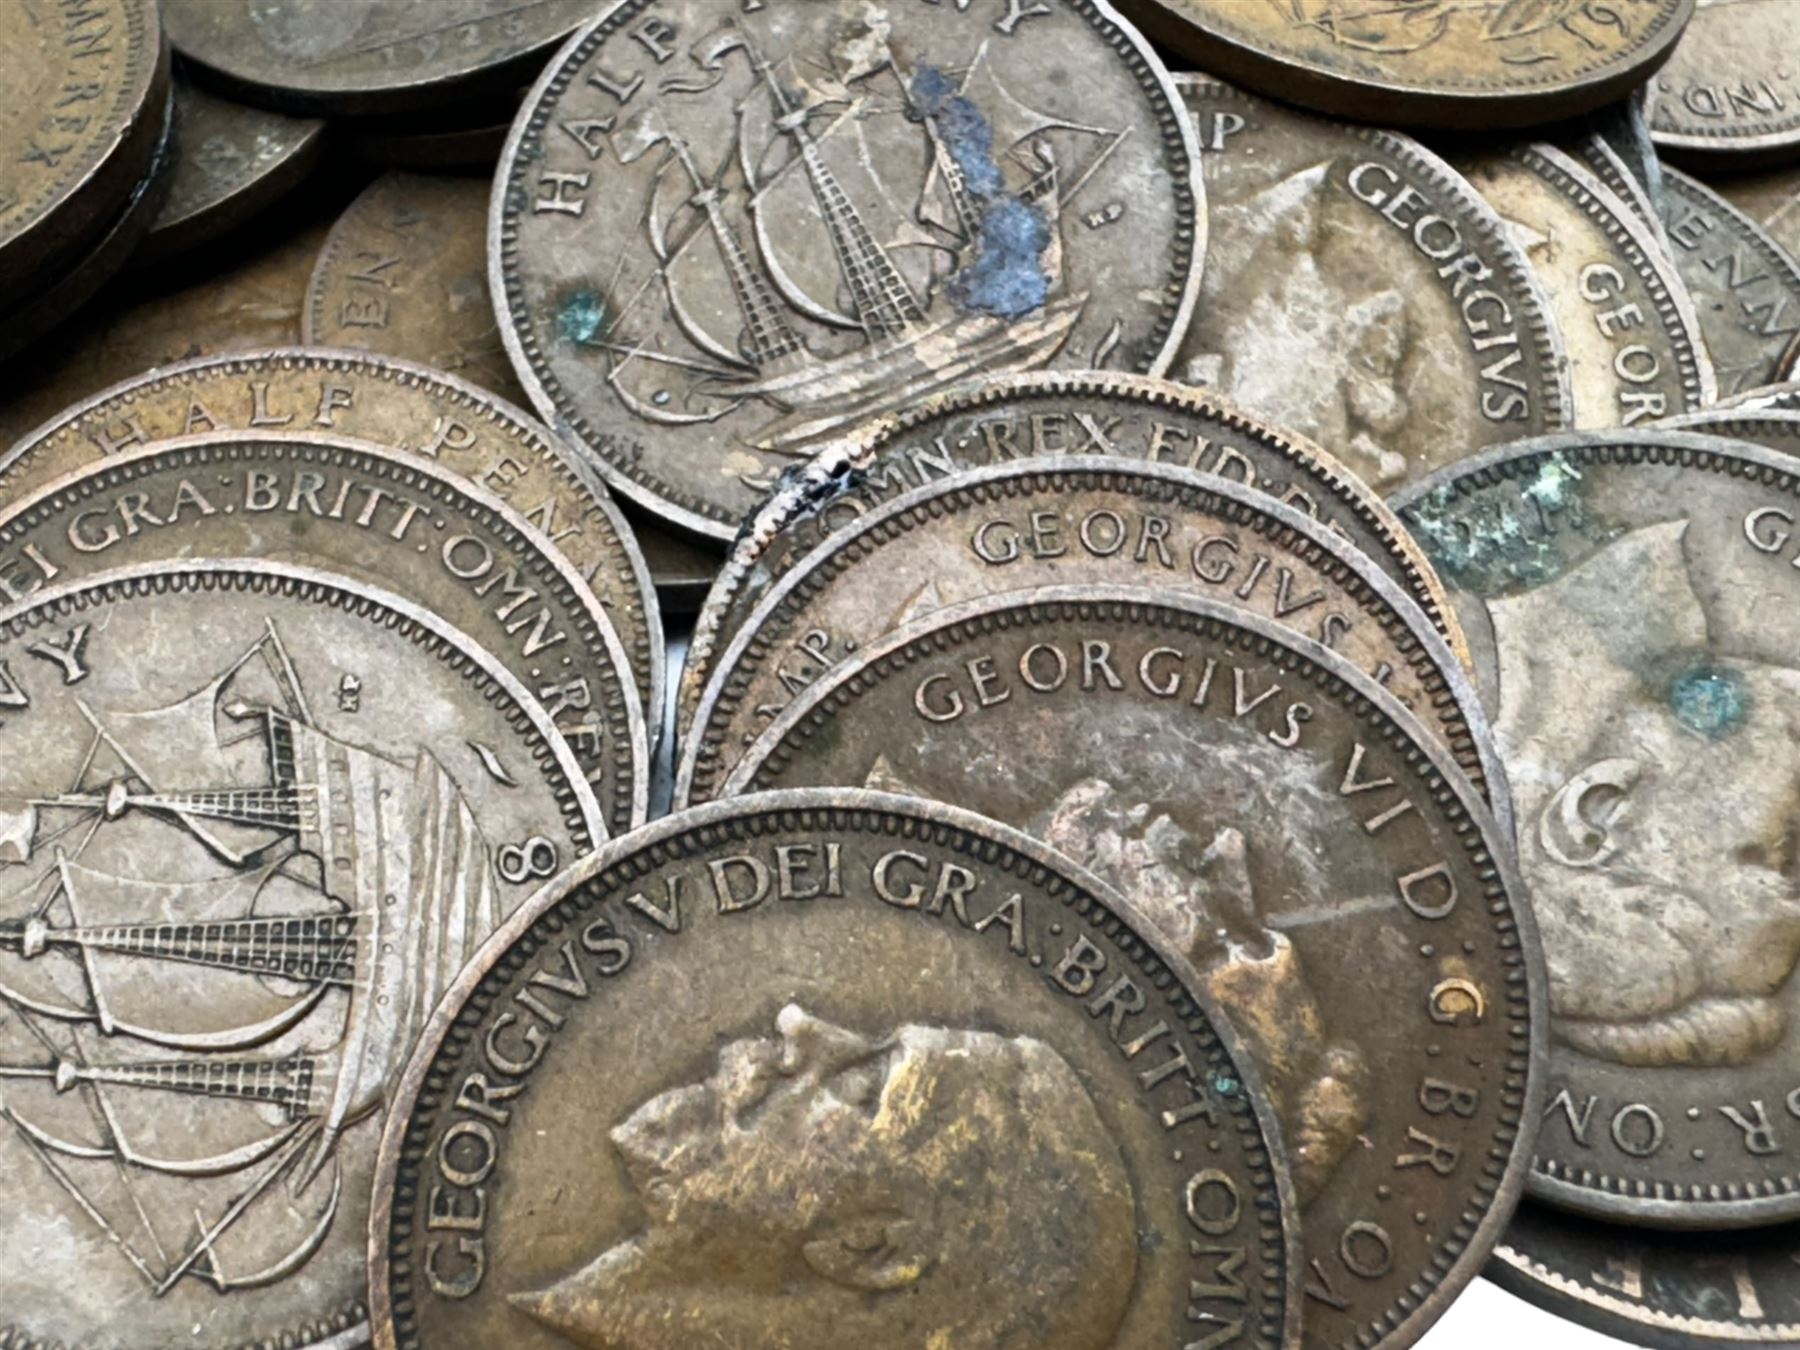 Coins including Elizabeth I 1573 sixpence and other hammered silver coins - Image 7 of 11